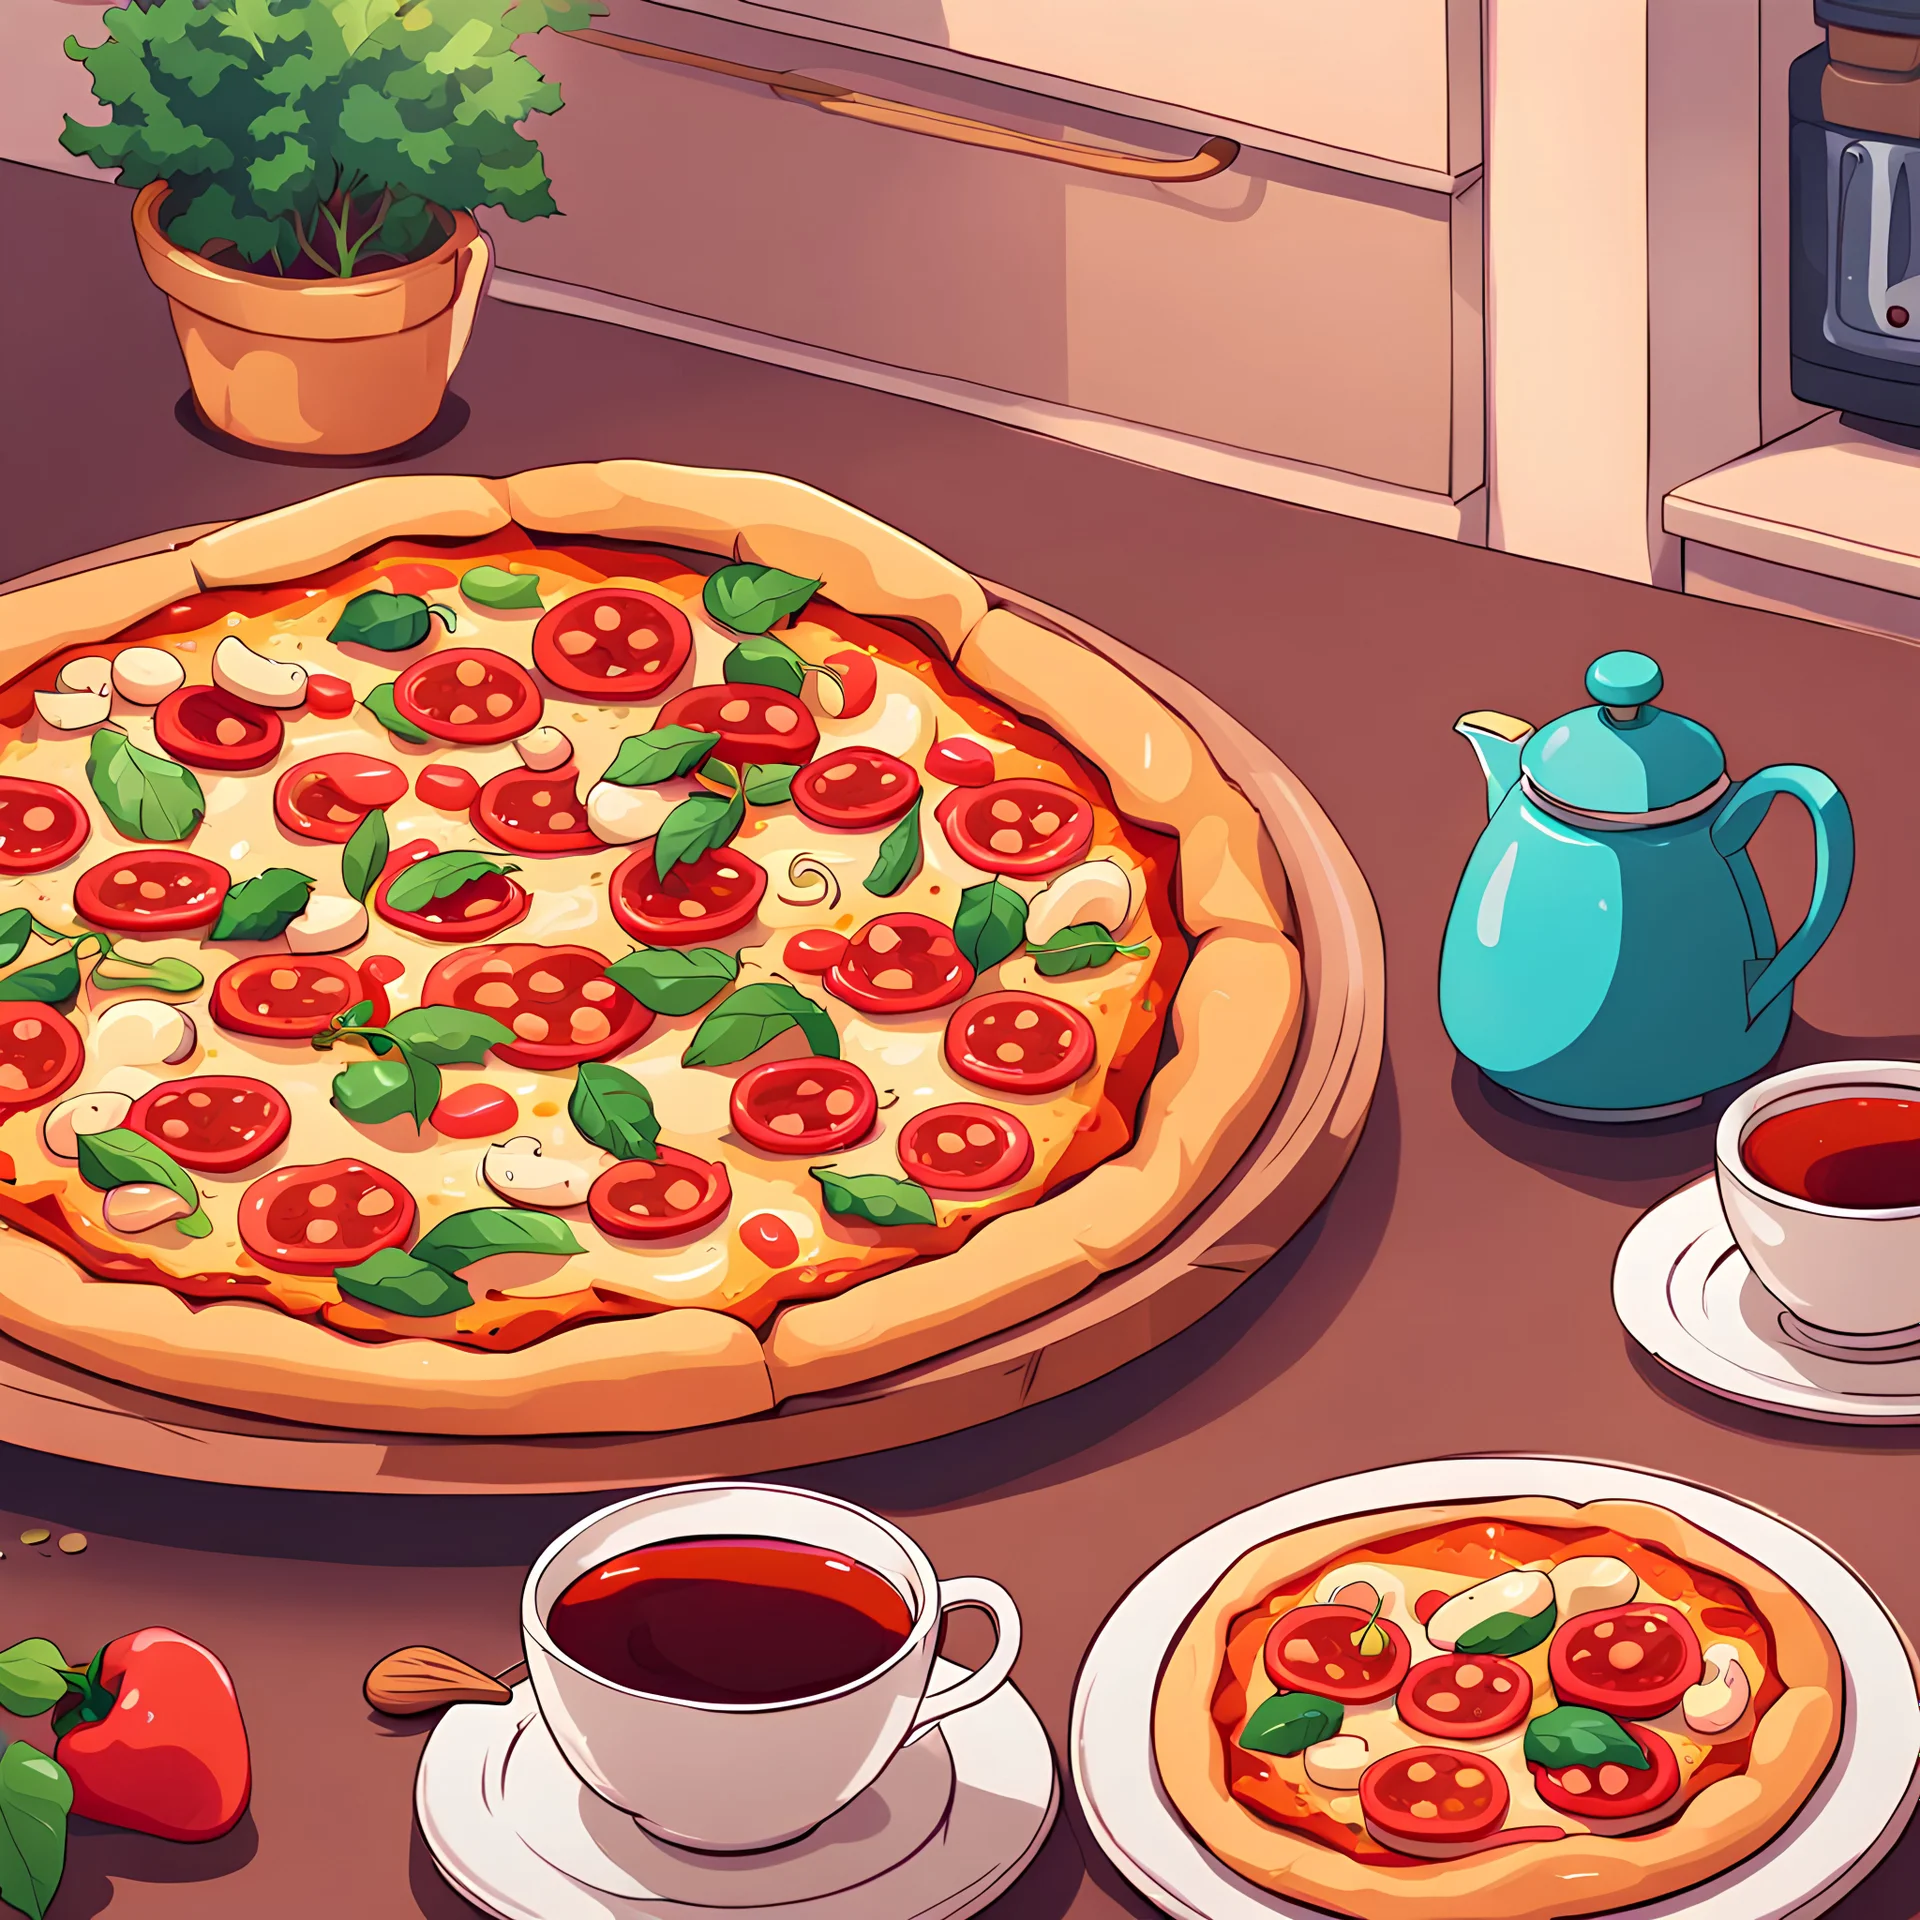 Pizza Sauce” Charlotte Review and Recommendations – Deirii Raifu